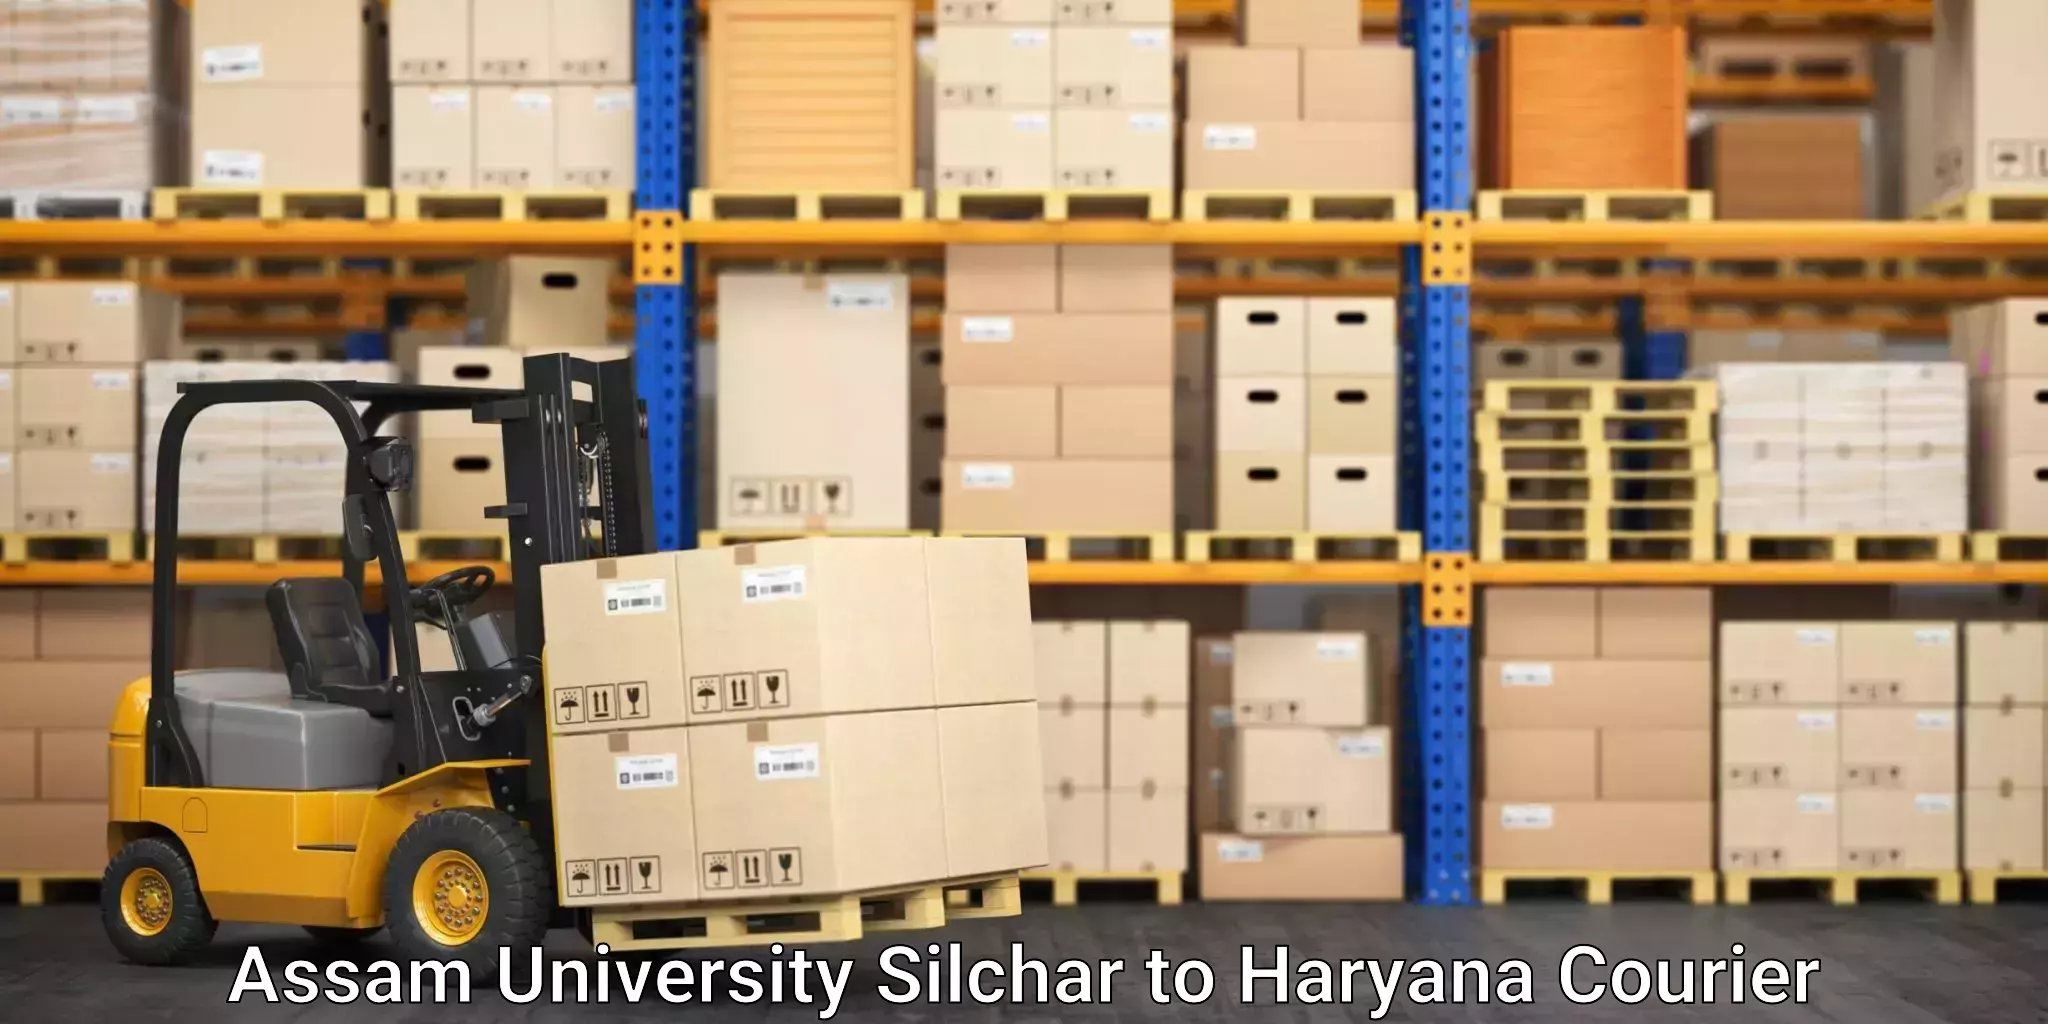 Round-the-clock parcel delivery Assam University Silchar to Siwani